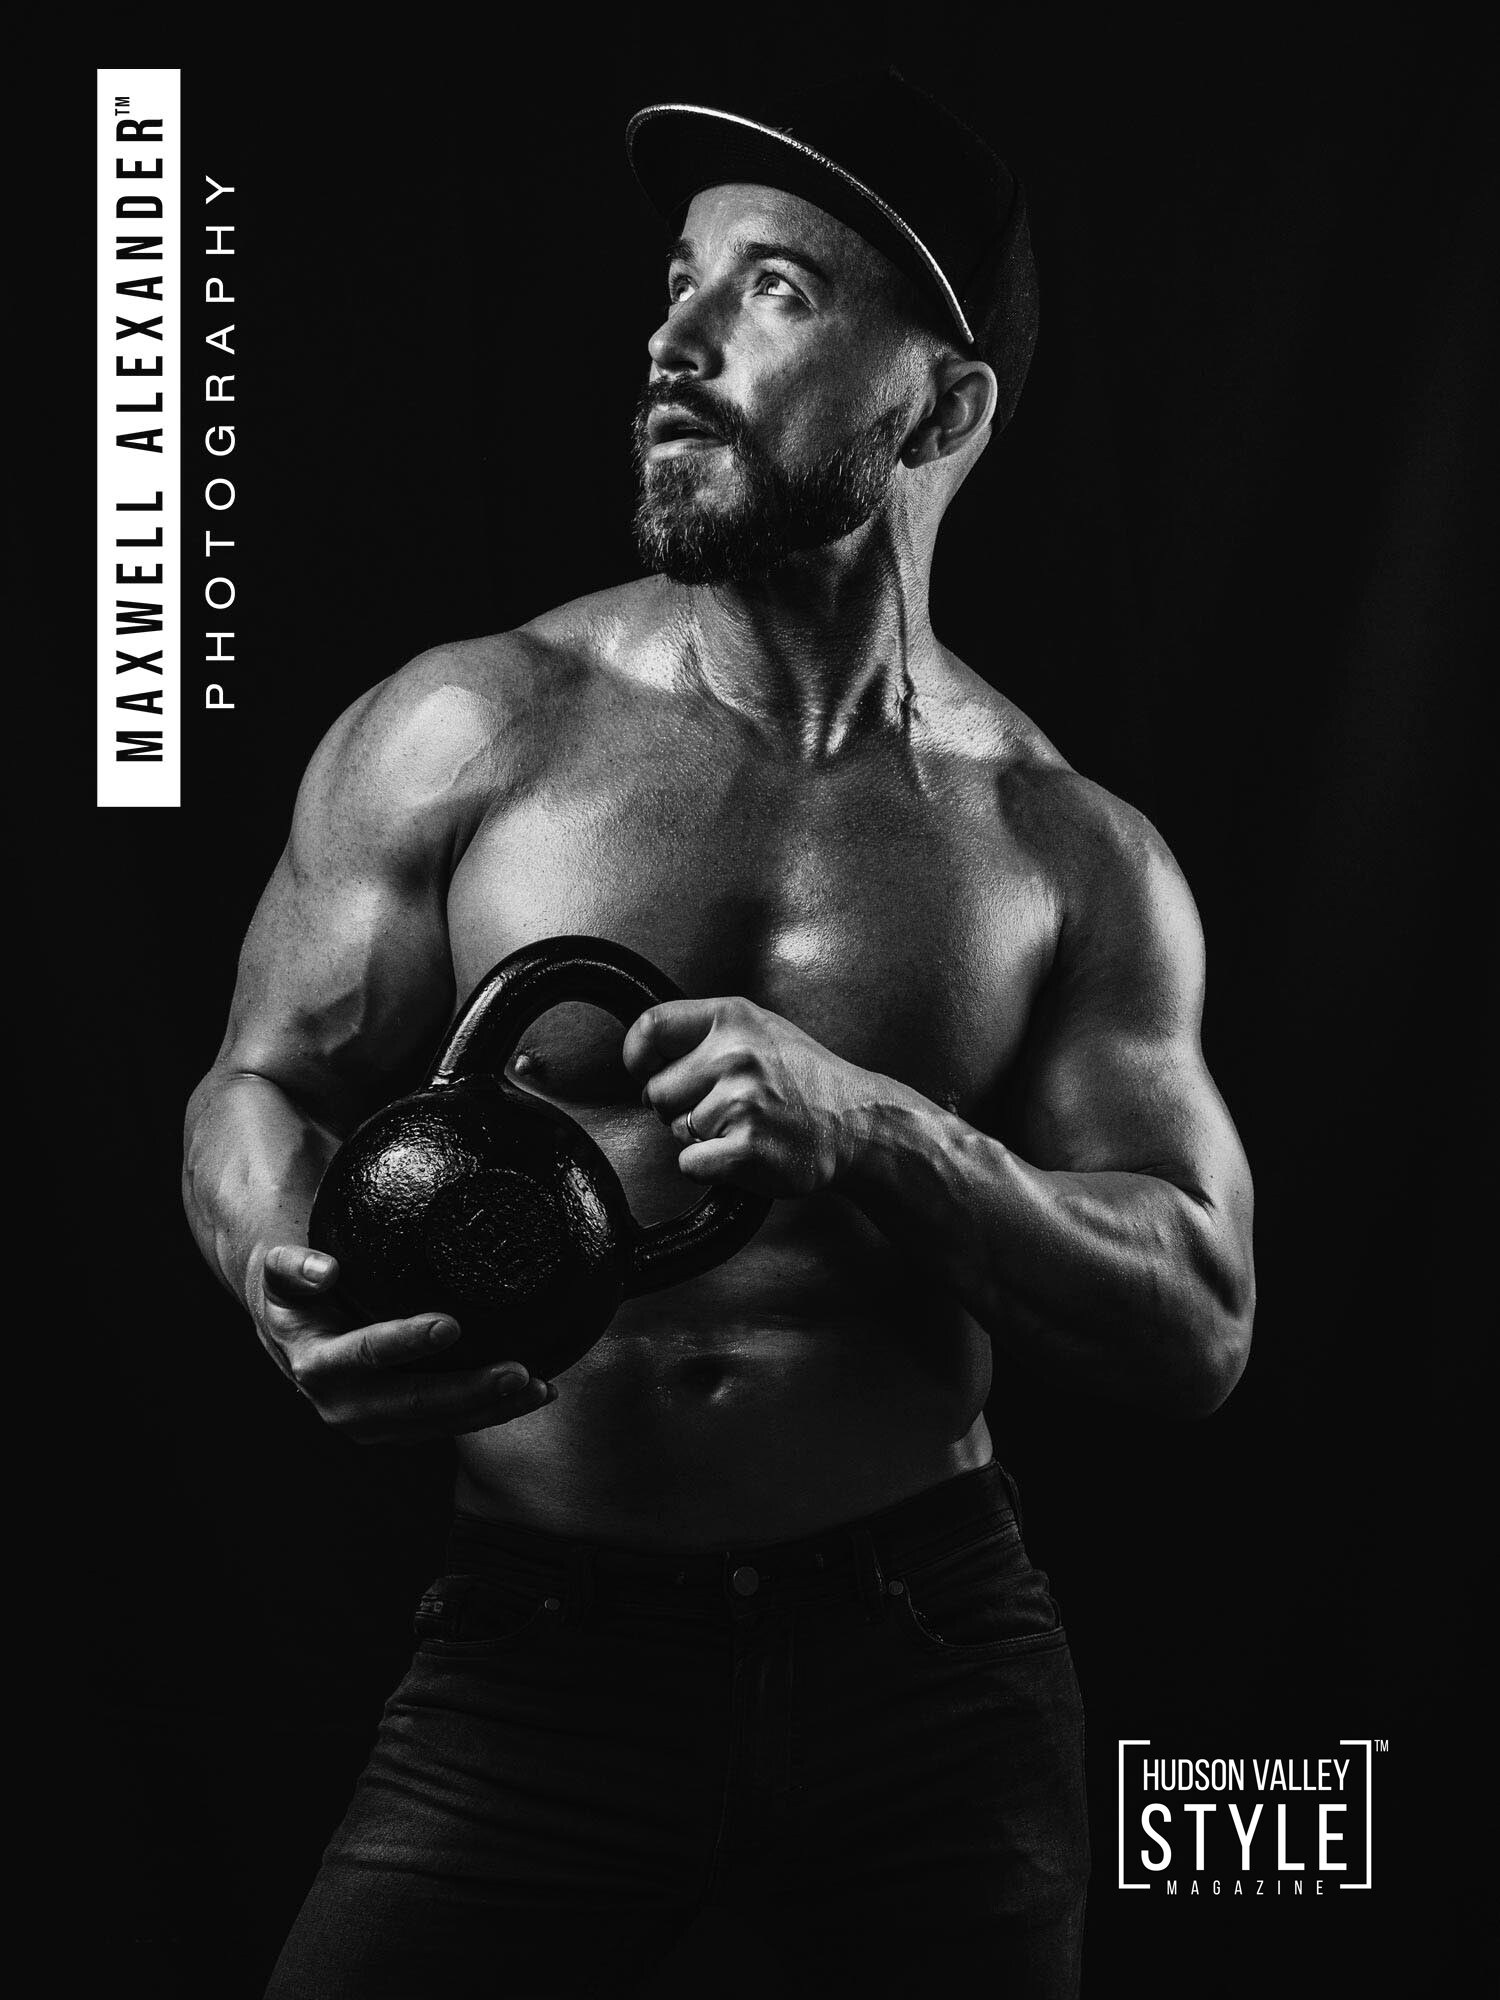 The History of Bodybuilding – Bodybuilding 101 with Coach Maxwell Alexander – Presented by "The Secrets of Natural Bodybuilding" Book by Coach Maxwell Alexander on Amazon Kindle